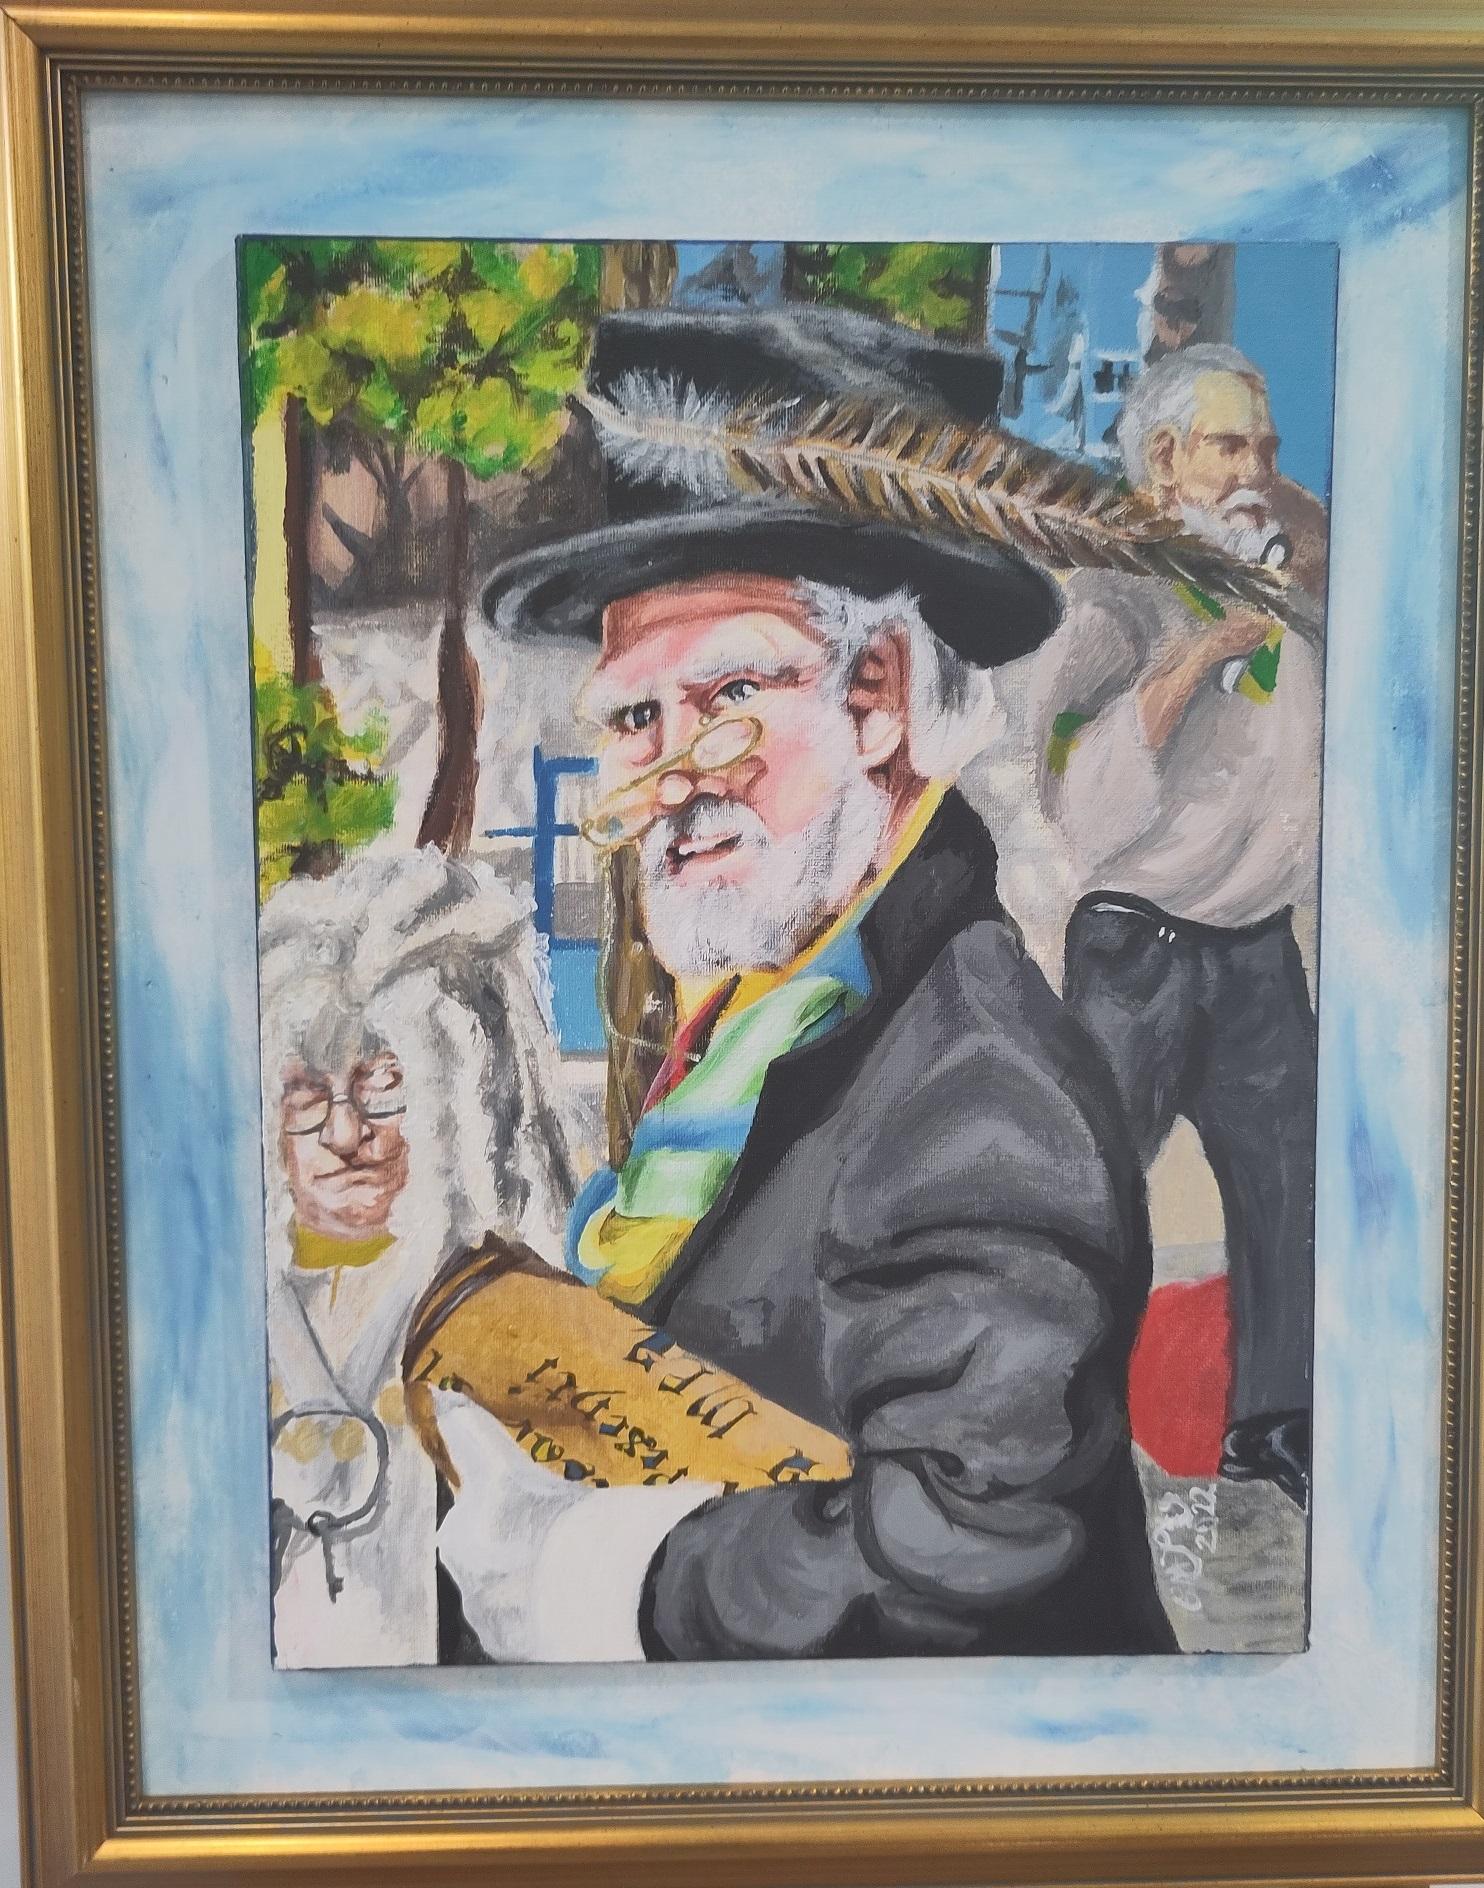 The image shows a portrait of Chris Malkin by local artist Glenn James, created as part of Newcastle’s 850th anniversary celebrations in 2023.